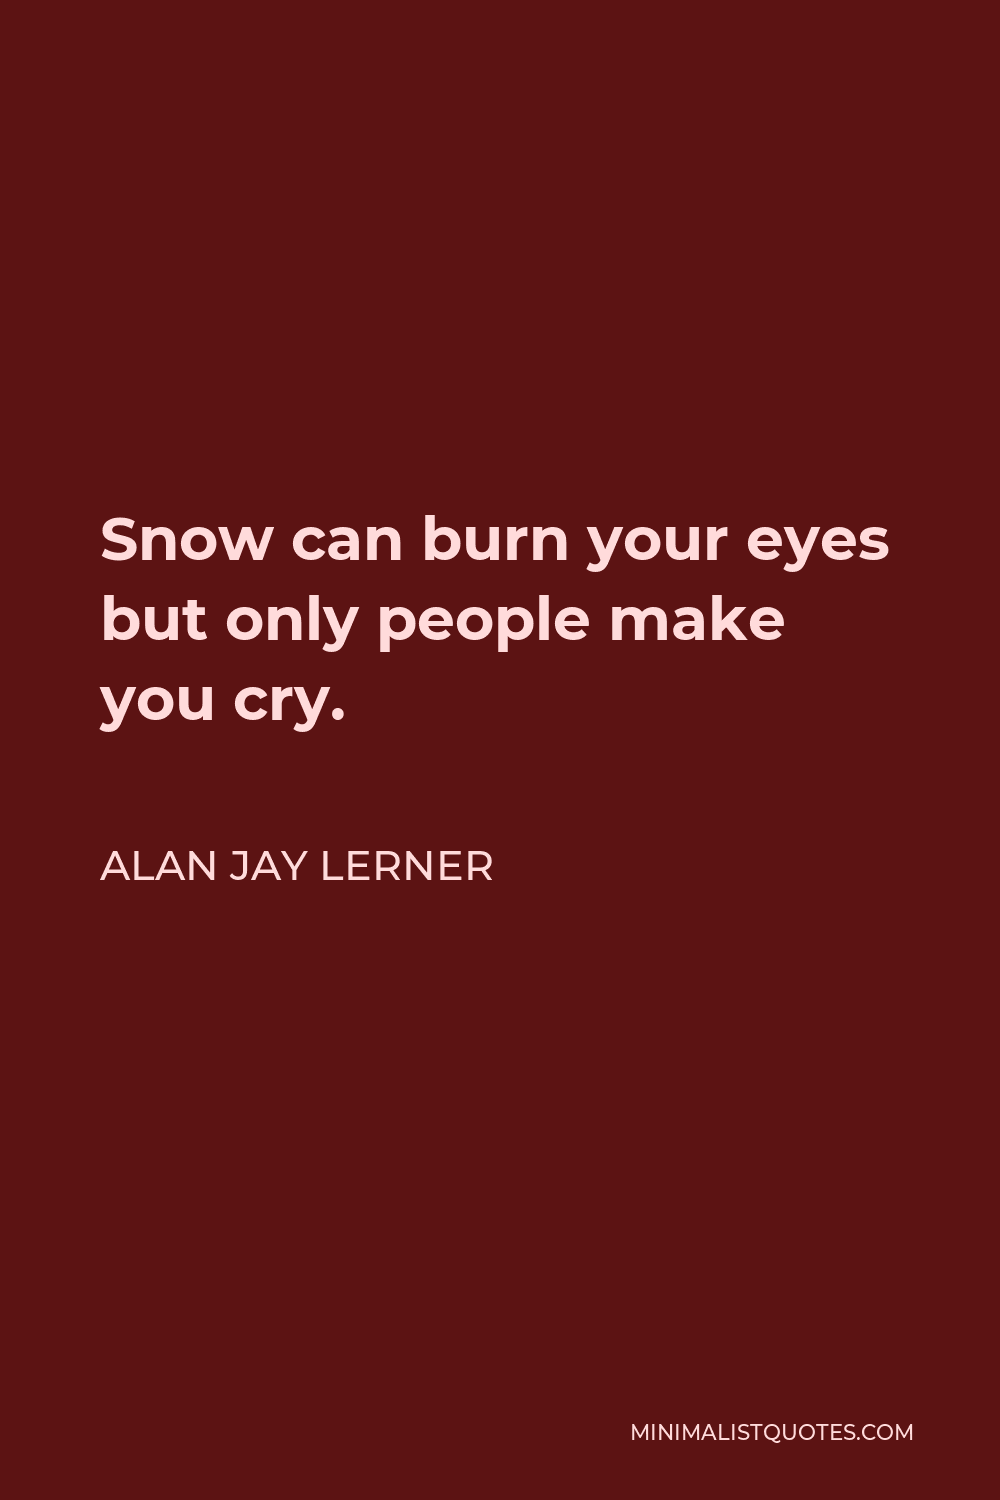 Alan Jay Lerner Quote - Snow can burn your eyes but only people make you cry.